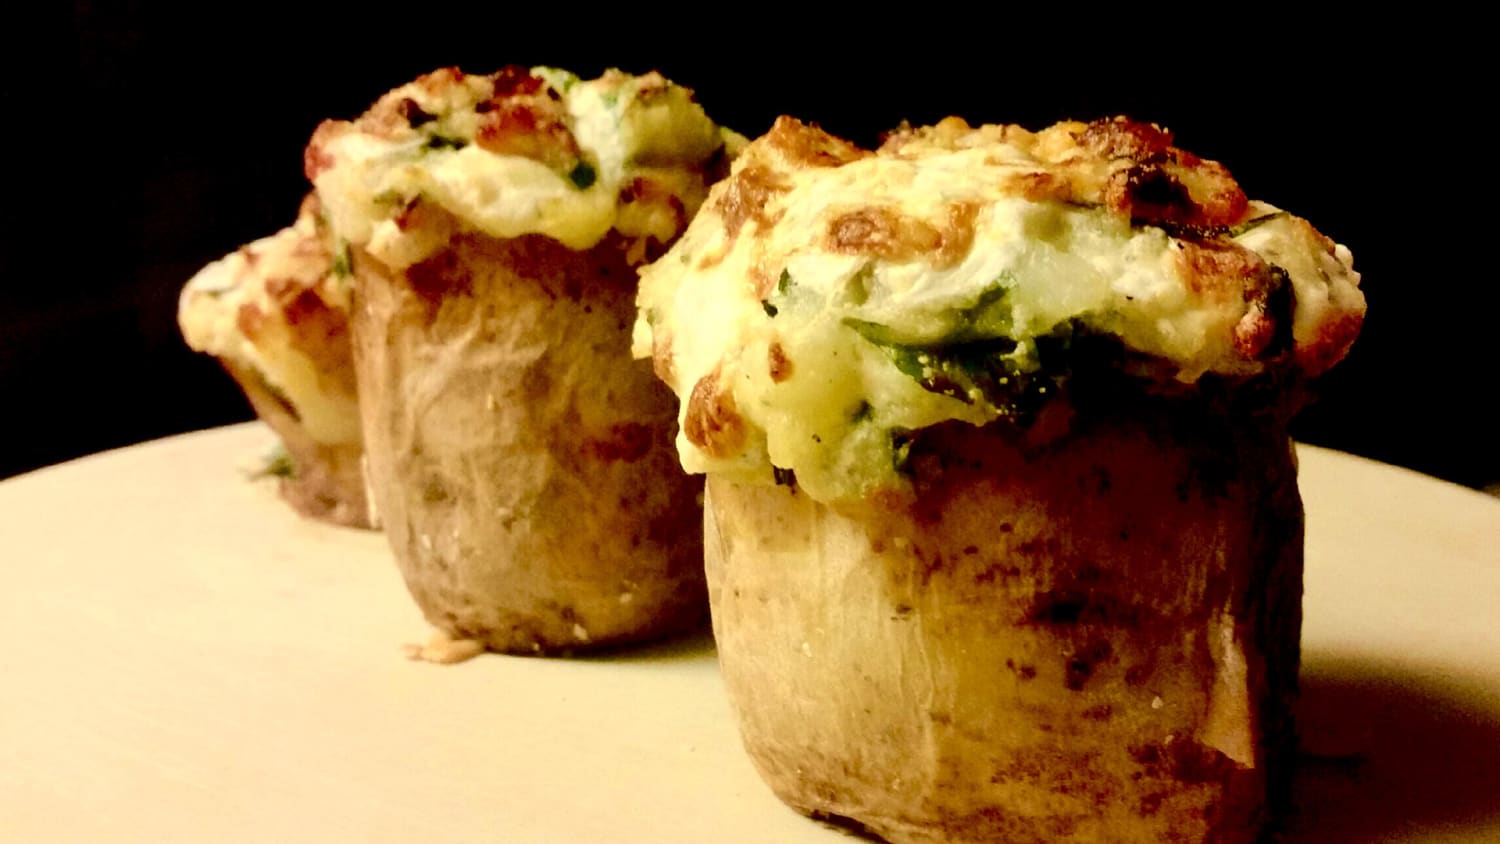 Loaded Baked Potato & Toppings – A Couple Cooks